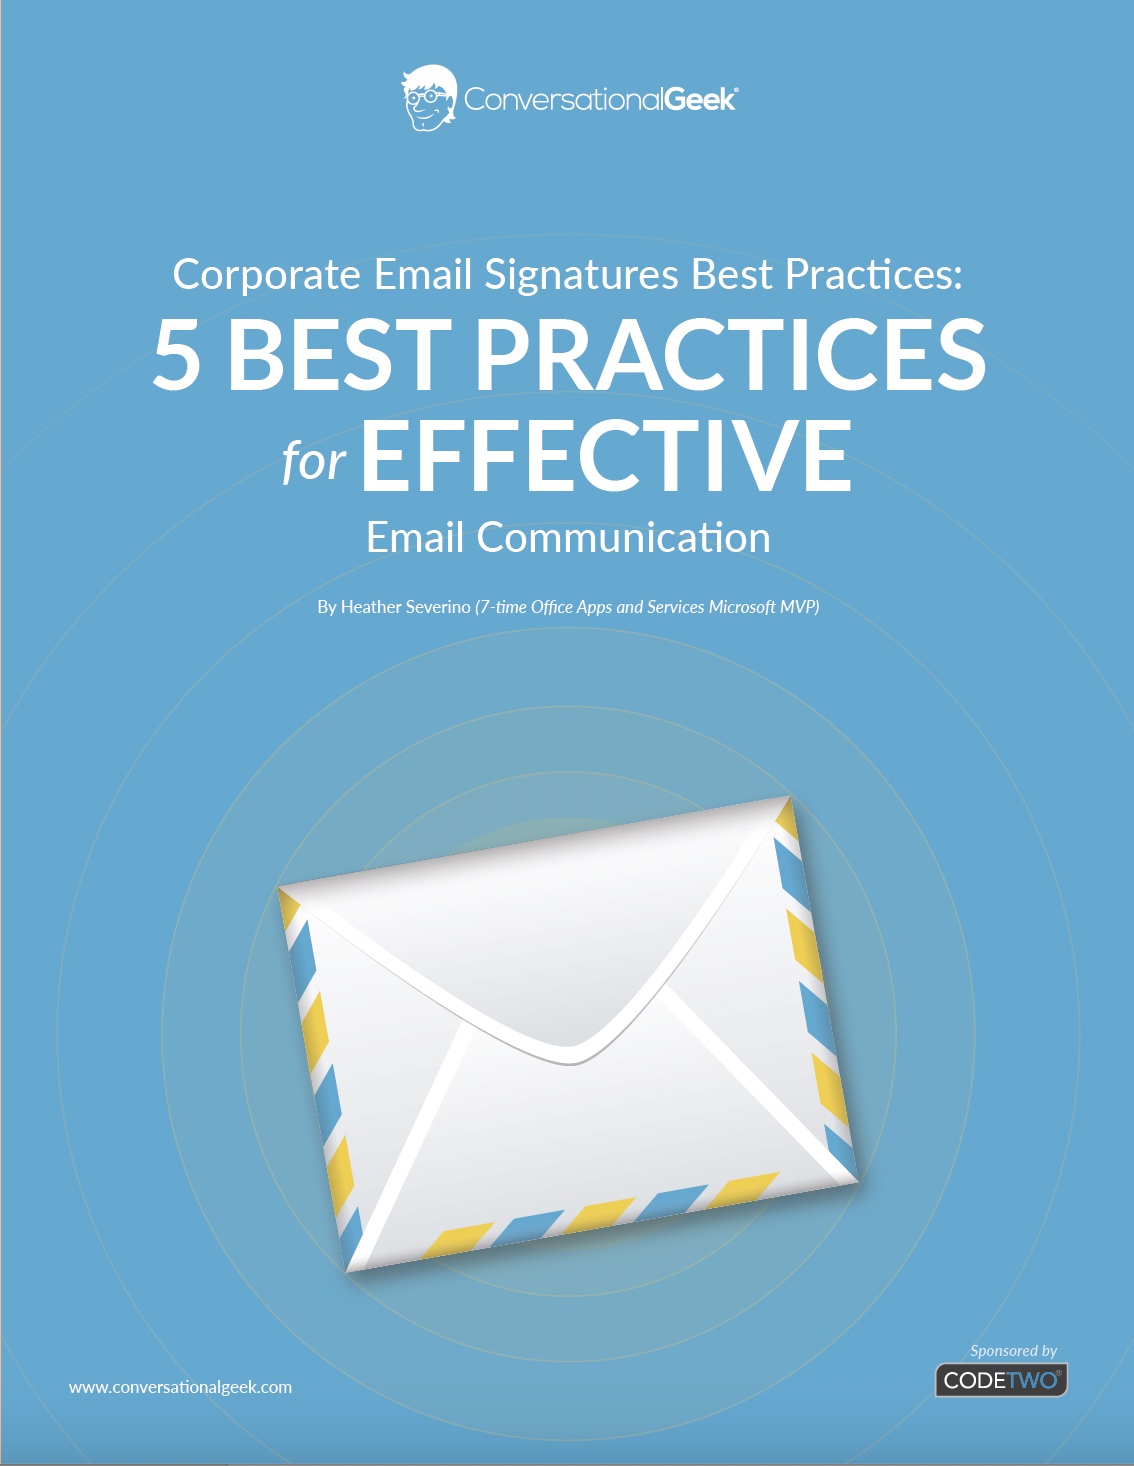 Conversational Geek - Five Best Practices for Effective Email Communication